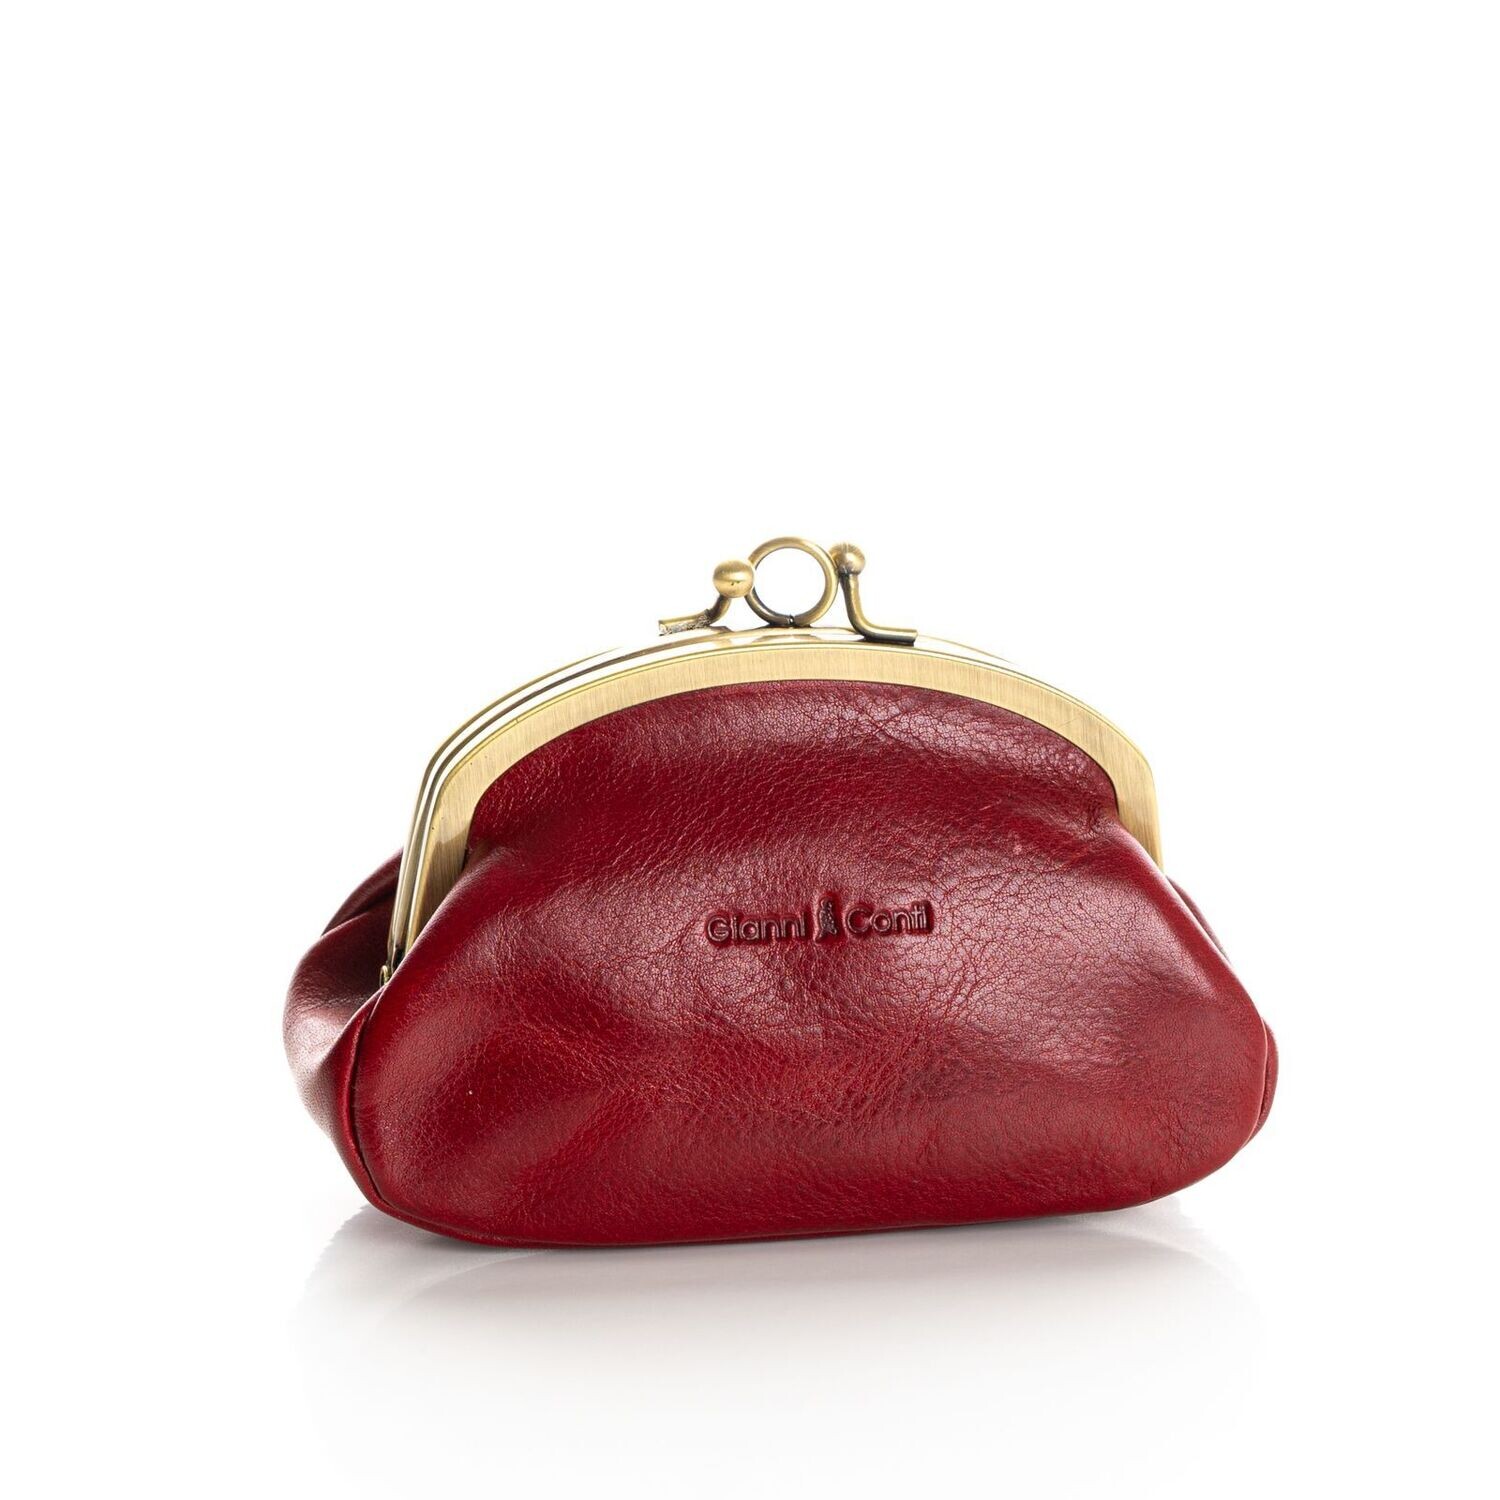 Gianni Conti Red Leather Double Section Clip Top Purse - 9408092 | David  Viggers Ltd - Classic And Fashion Accessories